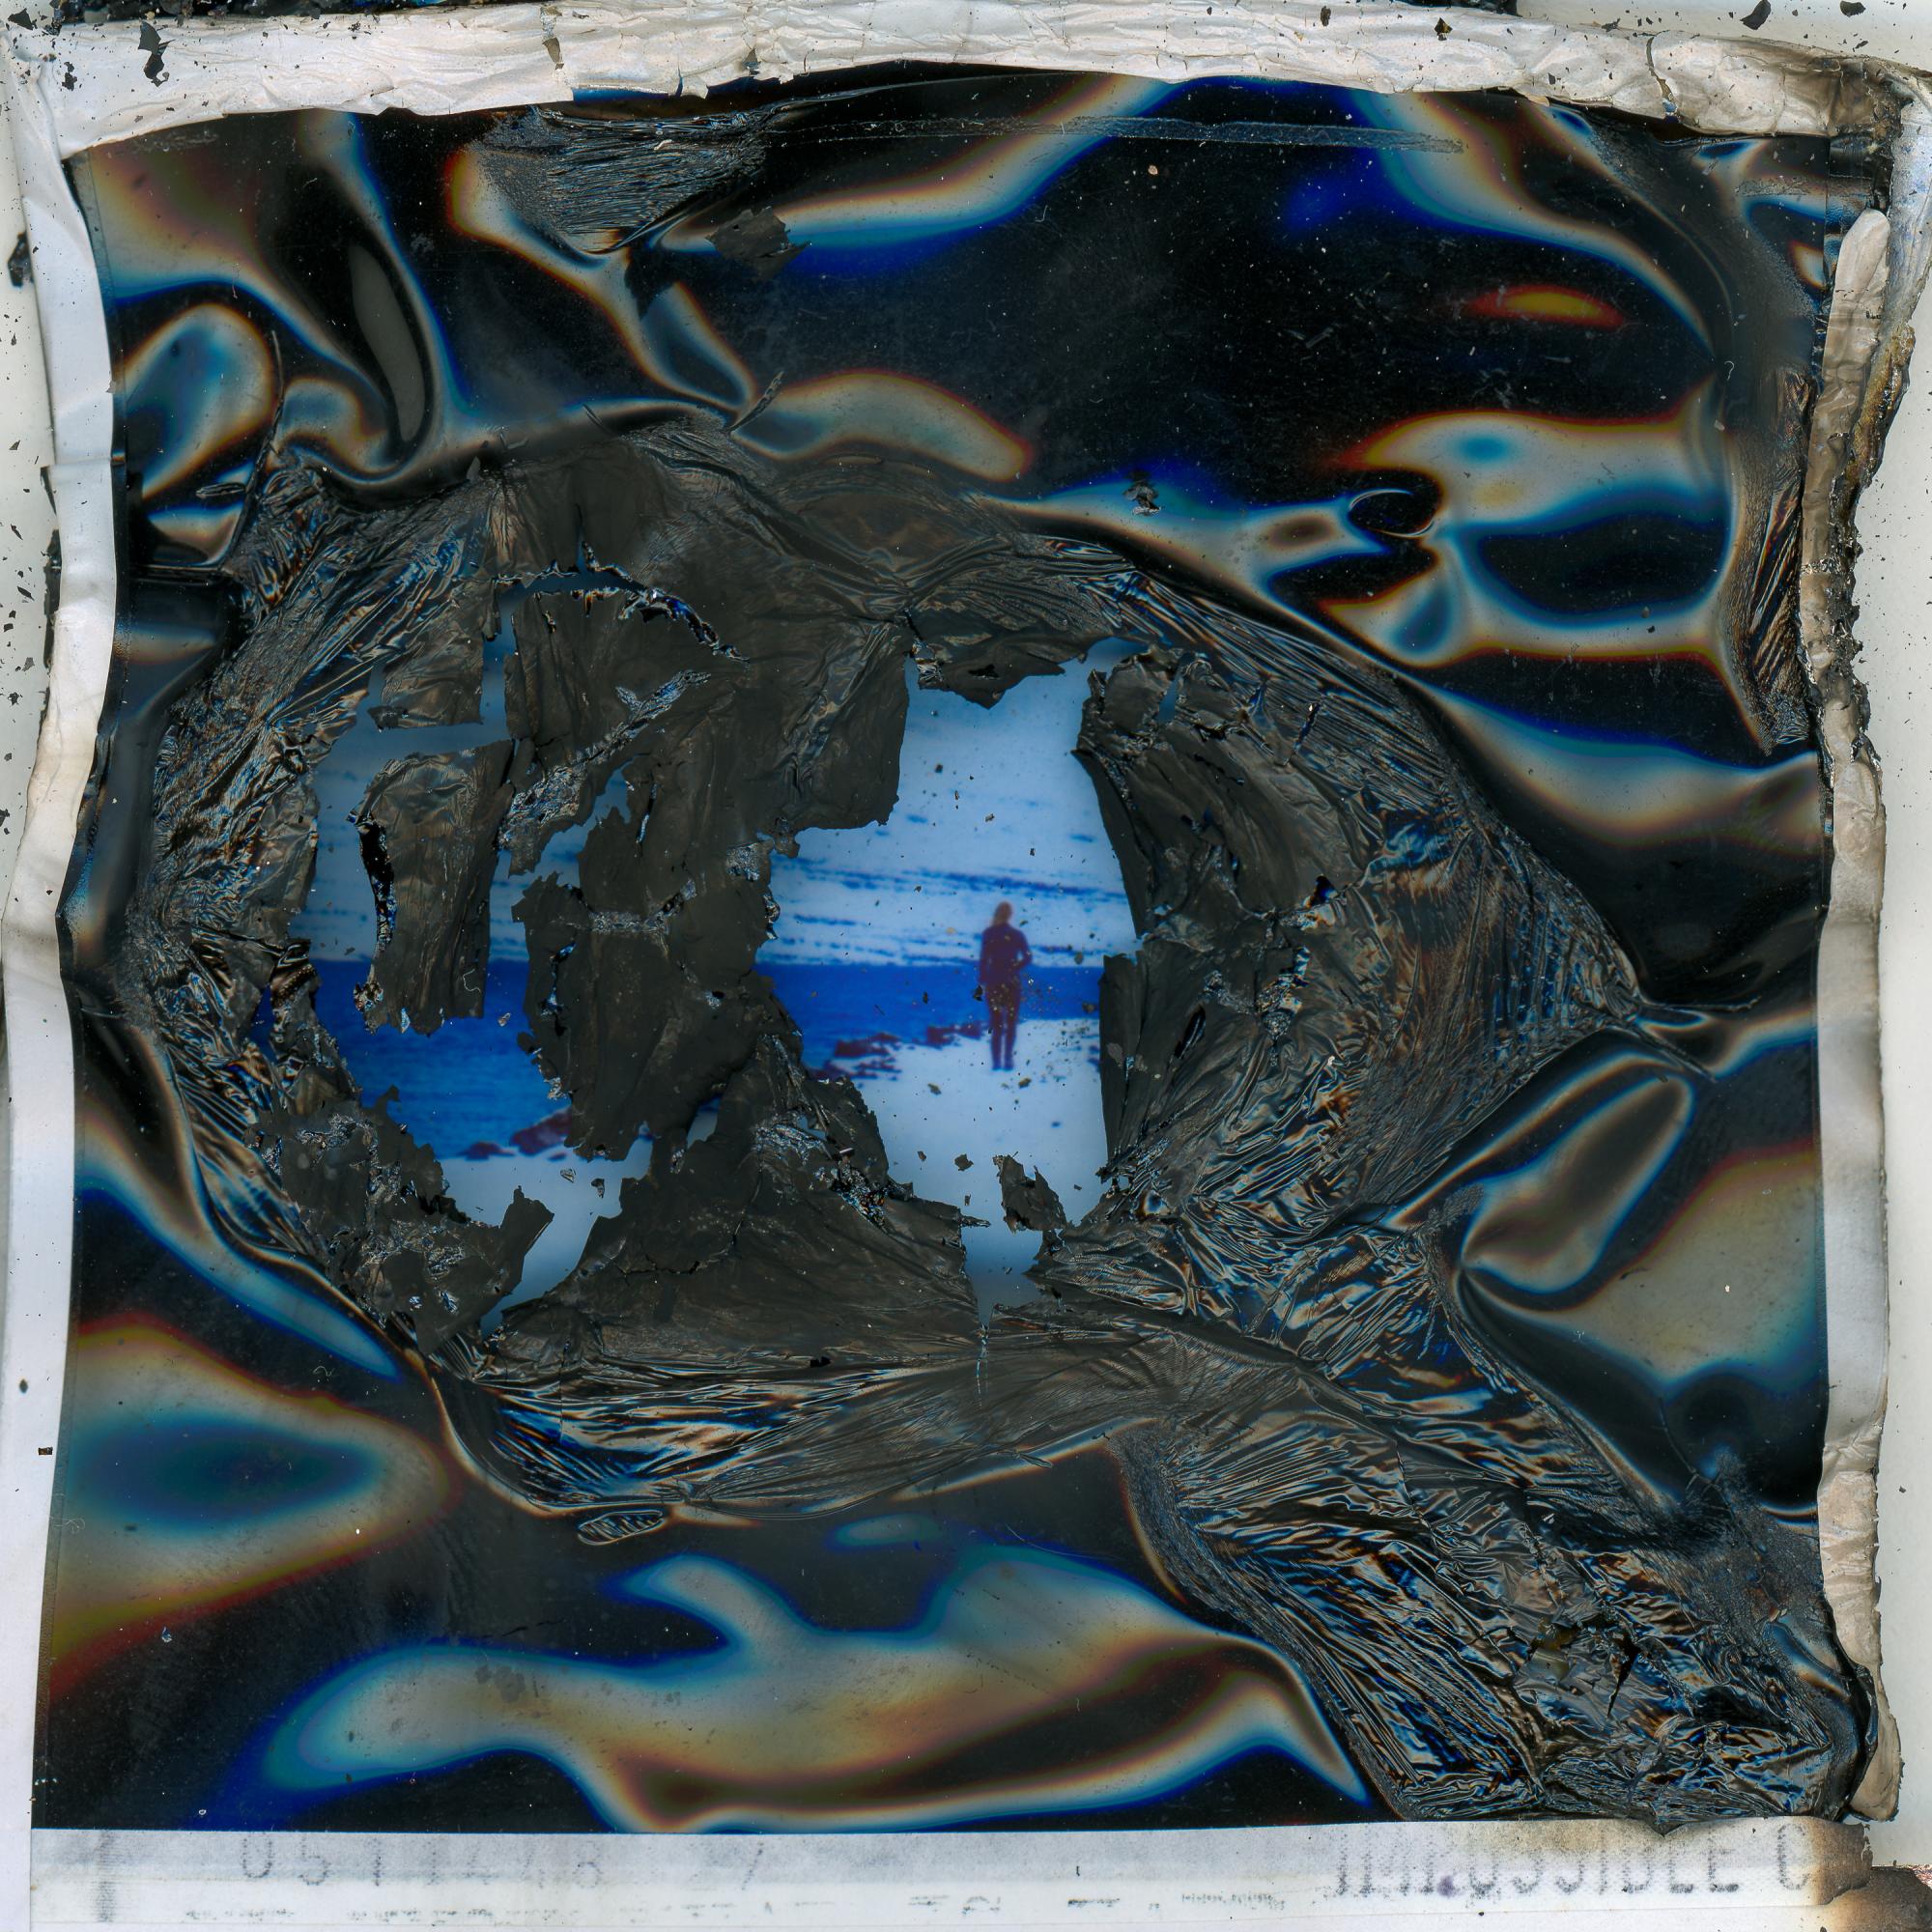 Distorted and damaged photograph, with predominantly black areas, as well as medium dark blue, orange and white.